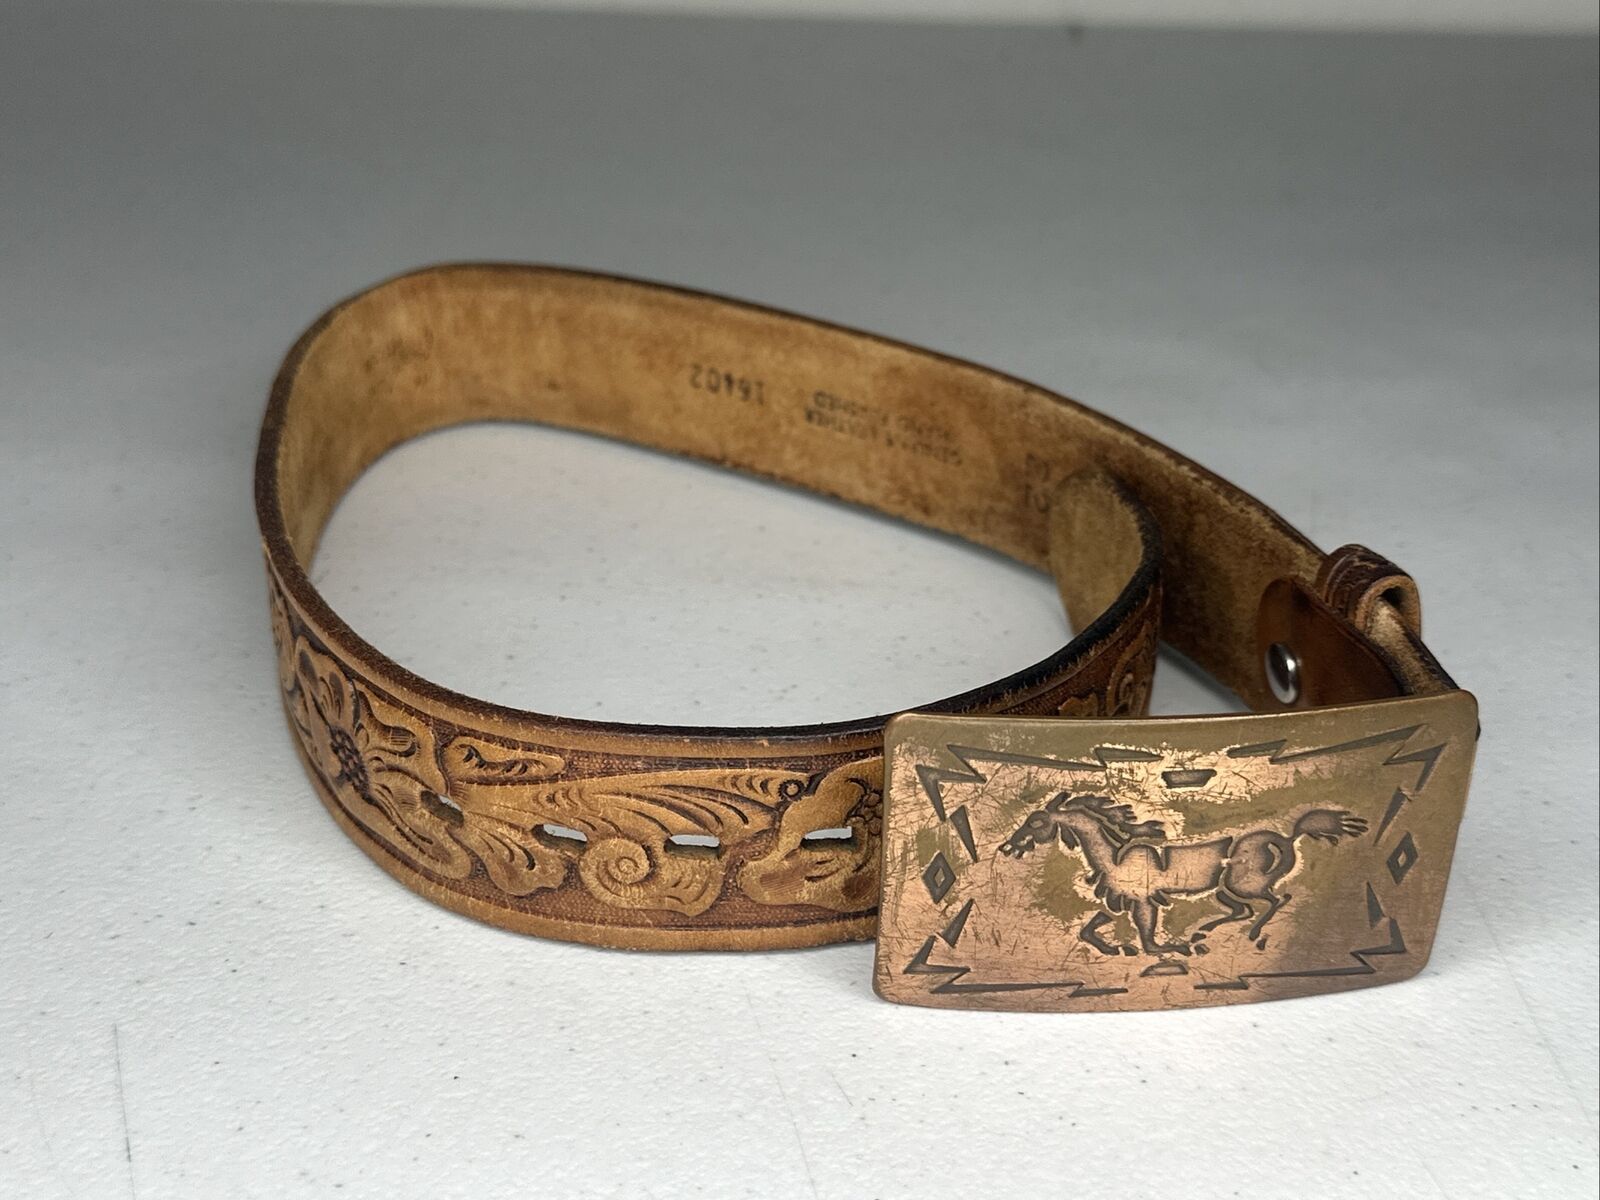 Vintage Chambers Belt Co. Handcrafted Kids Western Leather Belt - Size 22 with Embossed Horse Design - TreasuTiques